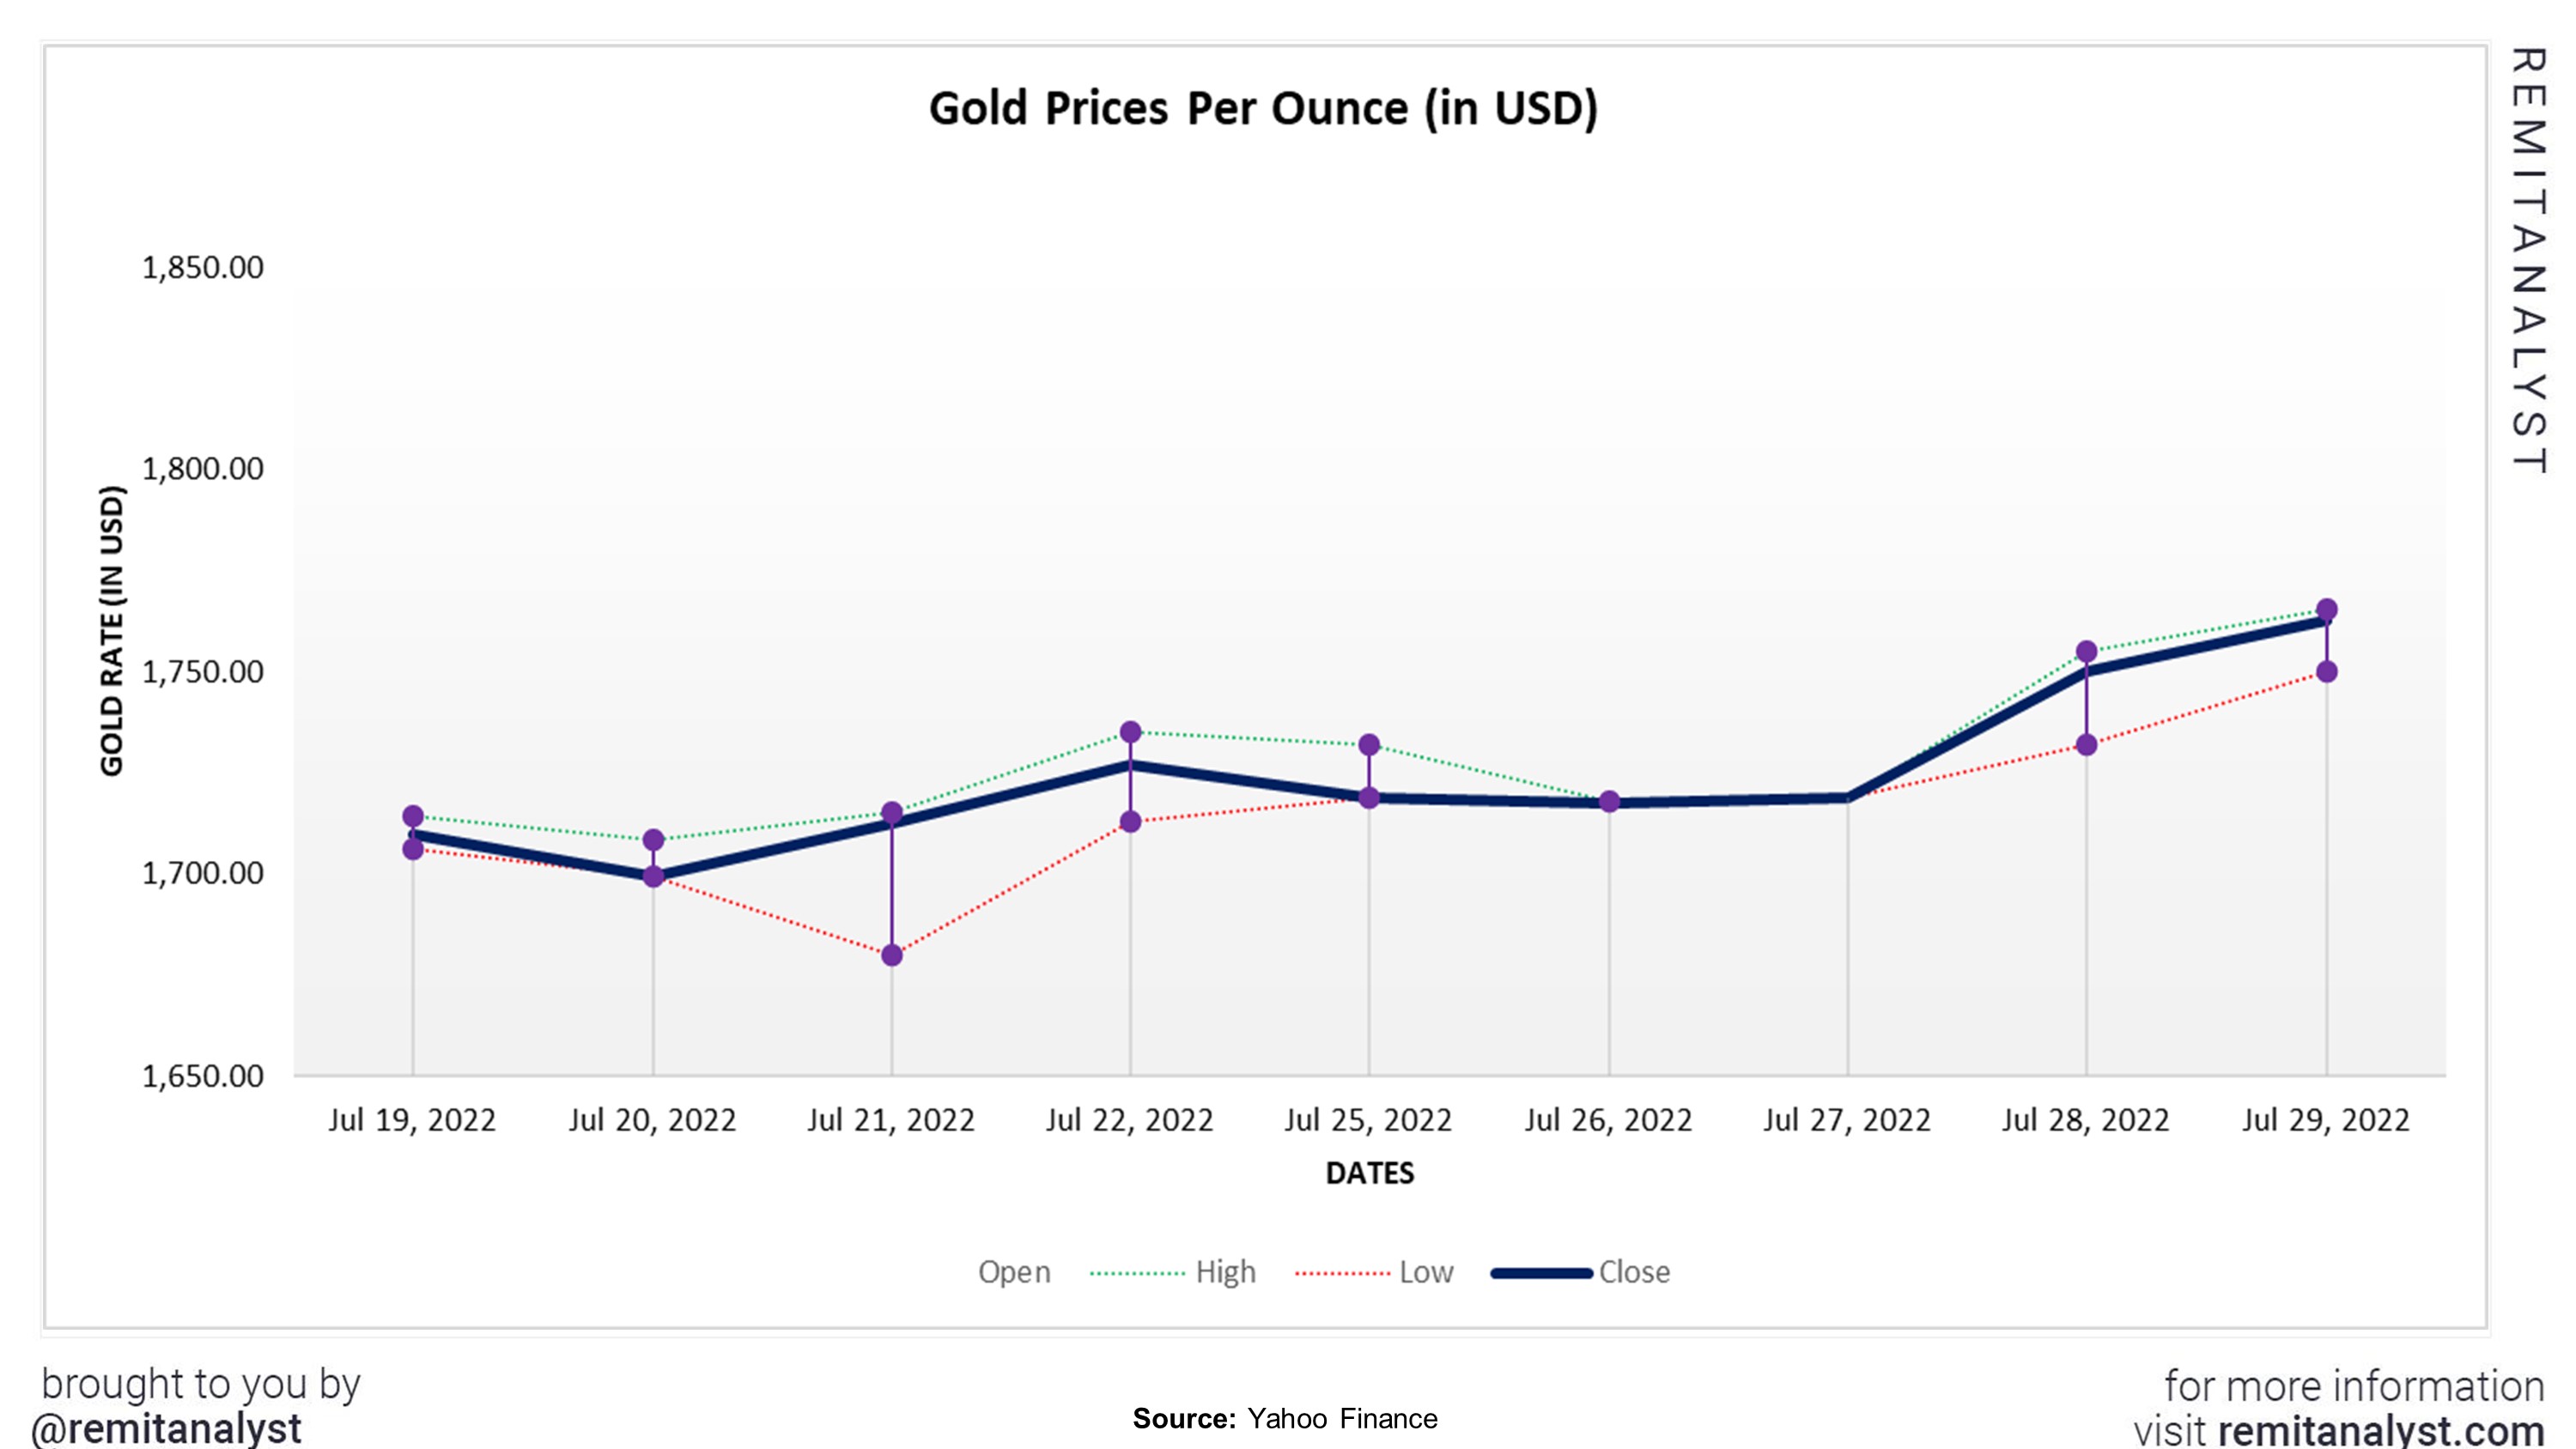 Gold_Prices_from_07-19-2022_to_07-29-2022 